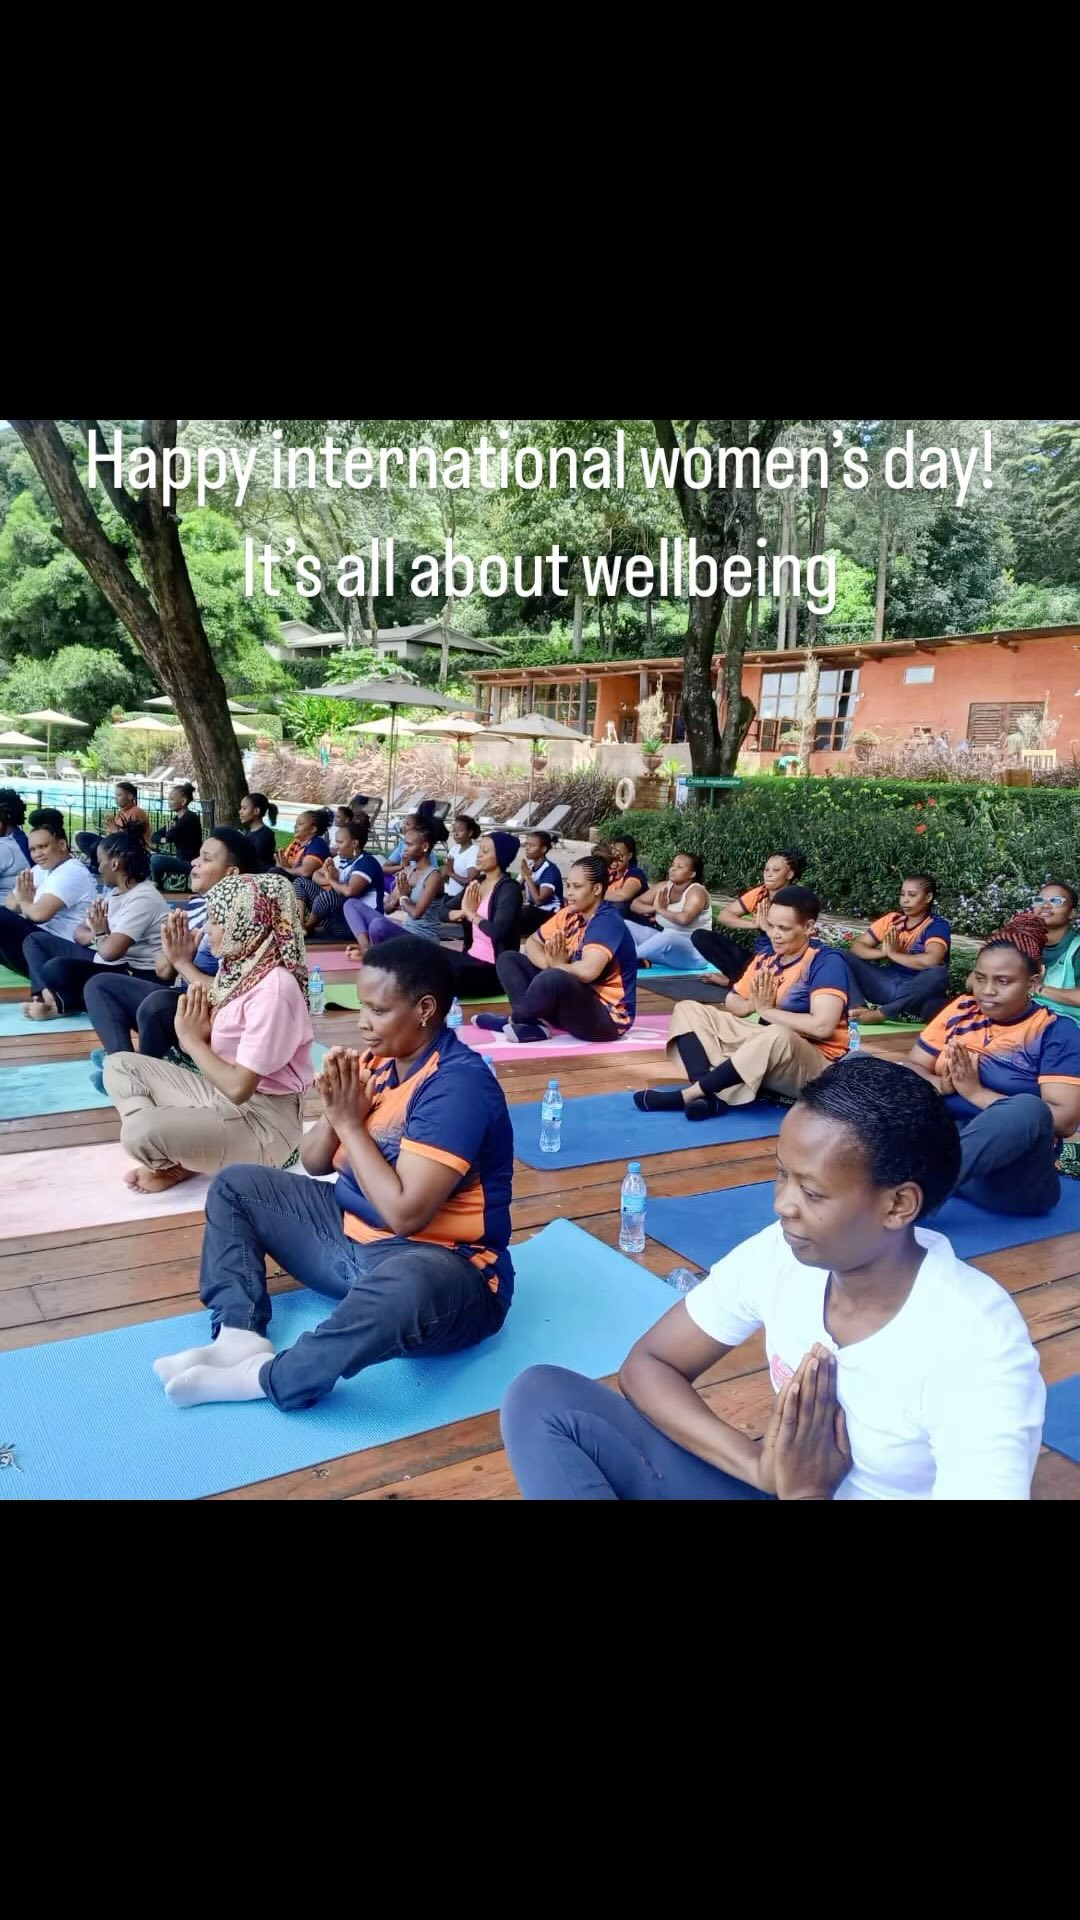 Happy International Women Day today the females from Gibb’s Farm had guest @rehemafitness_wellness come to speak about wellbeing and take everyone through a gentle Yoga session. Most of us as working women with families who often put everything else and everyone else before ourselves. Rehema reminds us to take care of me! #internationalwomensday #wellbeing #wellness #wellnesscoach #care #selfcare #love #sisters #support